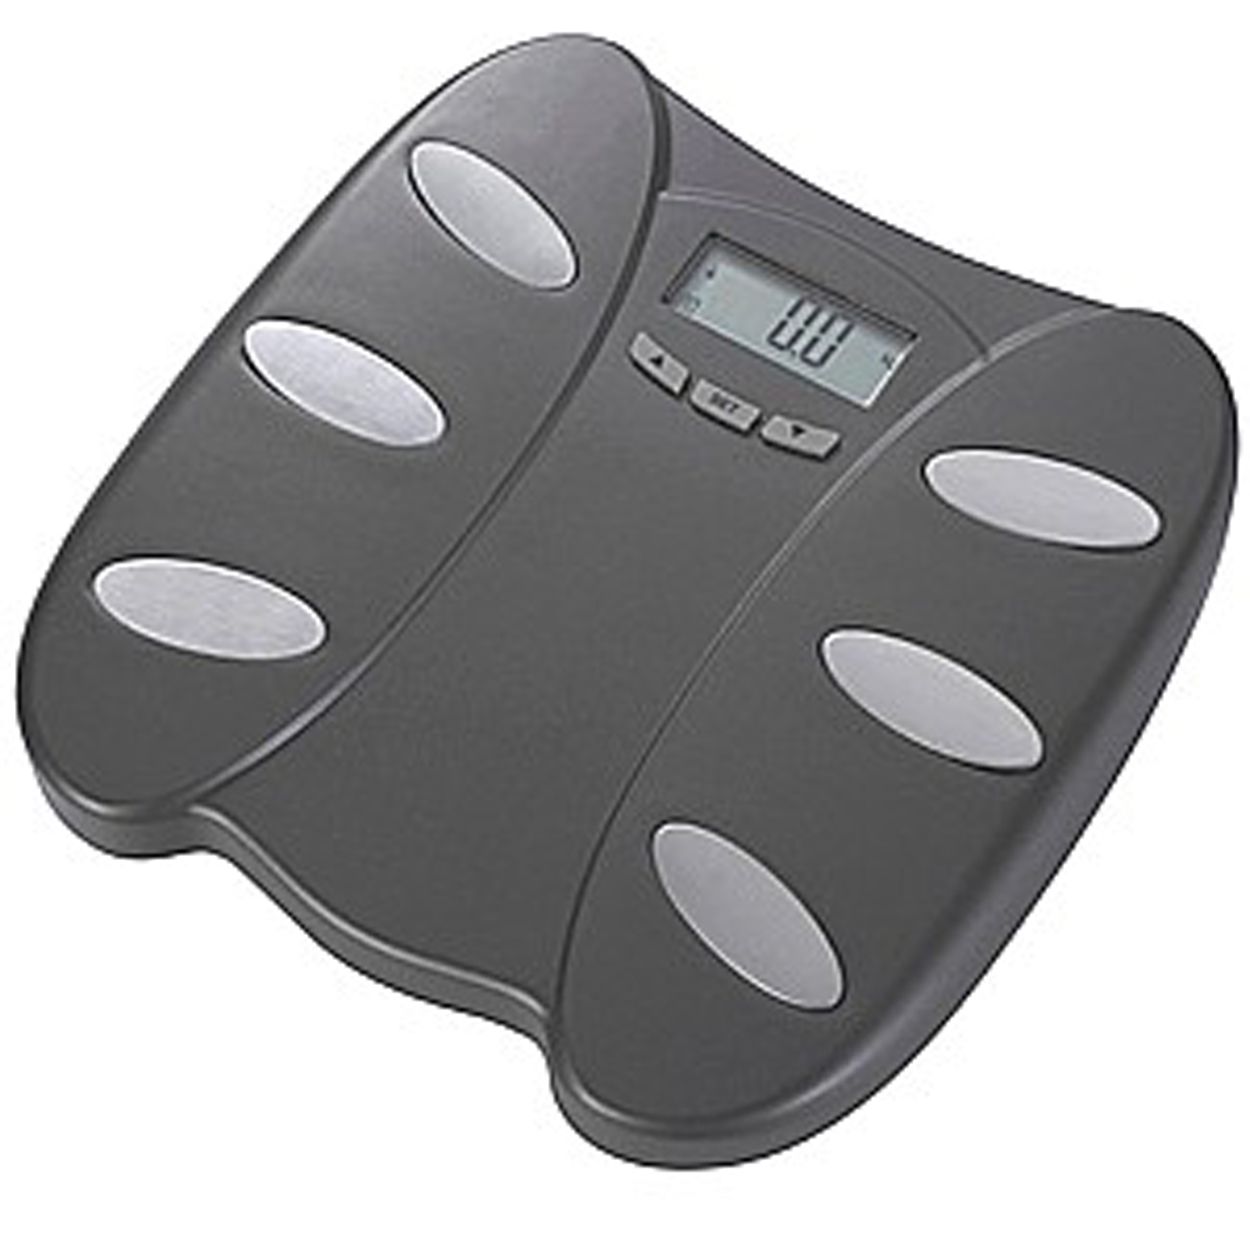 Whynter Digital Body Fat & Water Scale with 10 Memory Setting